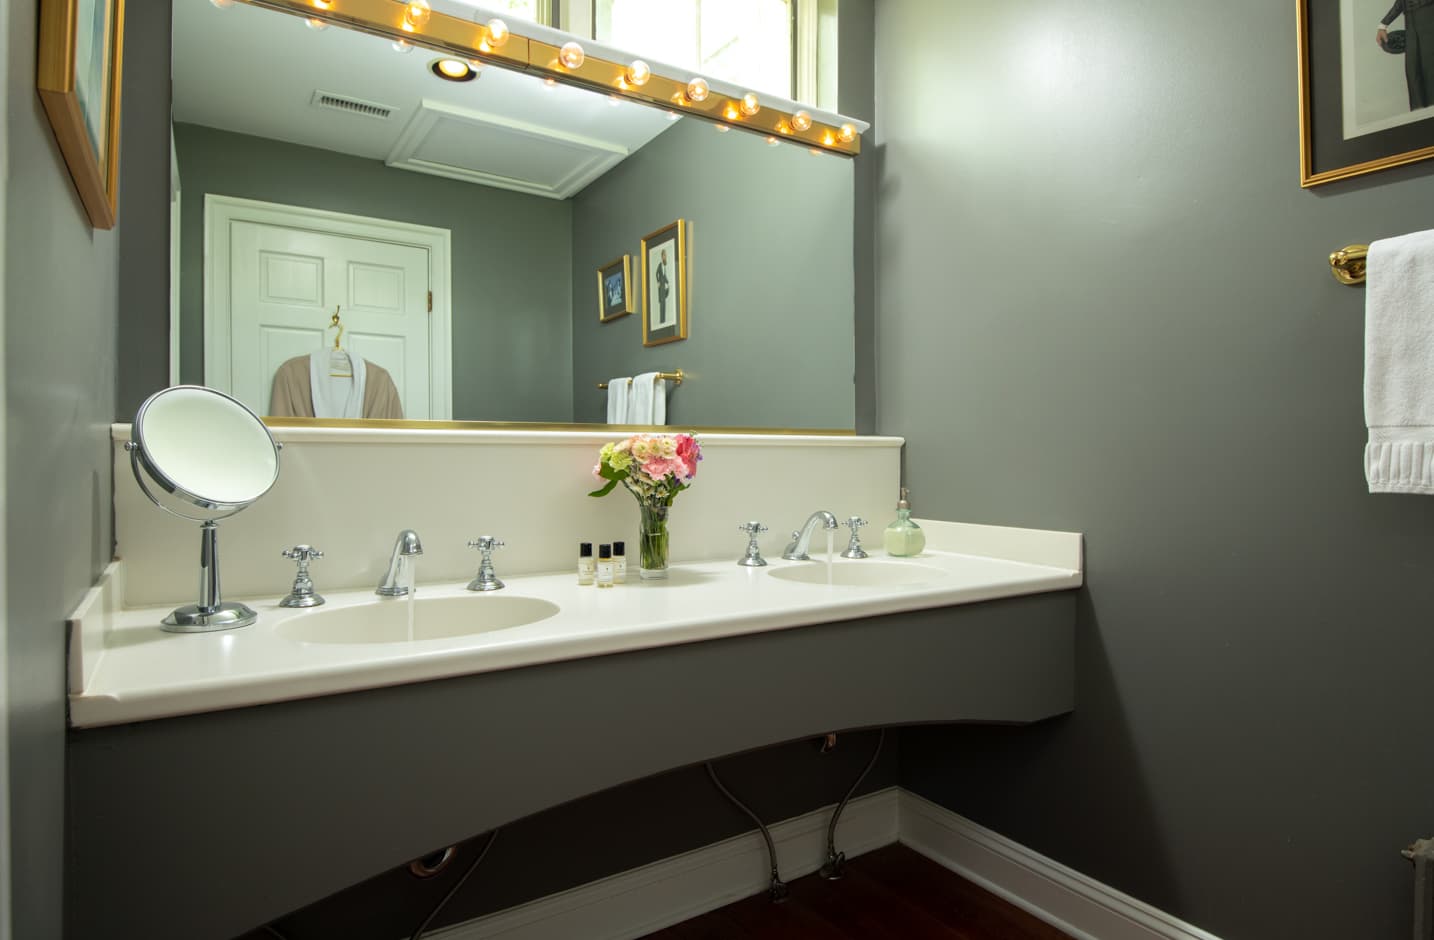 A double vanity sink in a bathroom with a large mirror and a robe hanging on the door